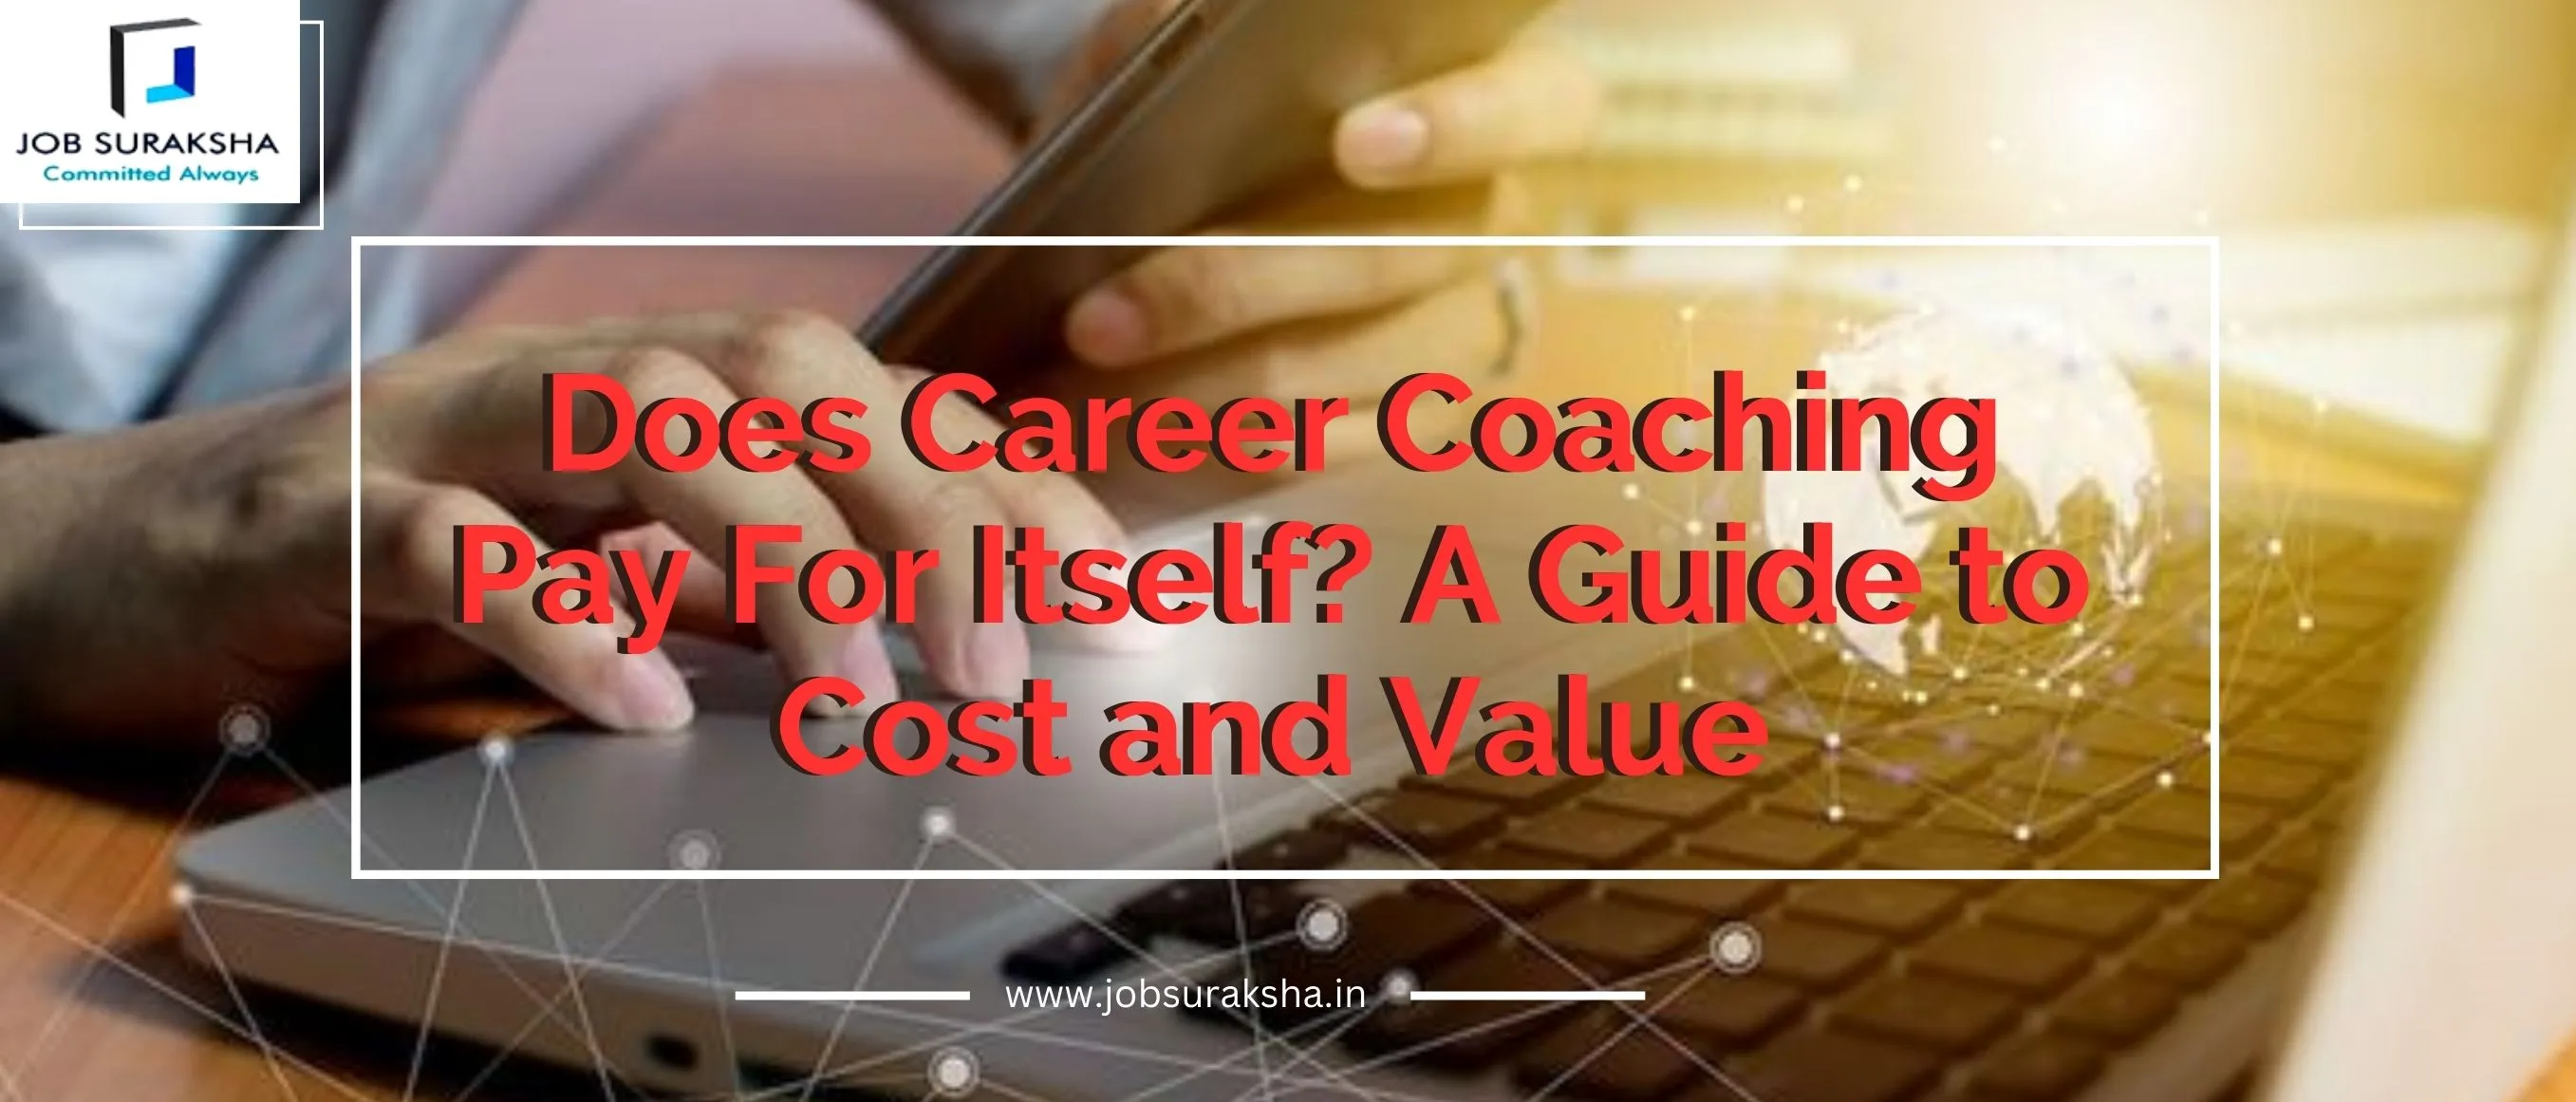 Does Career Coaching Pay For Itself? A Guide to Cost and Value